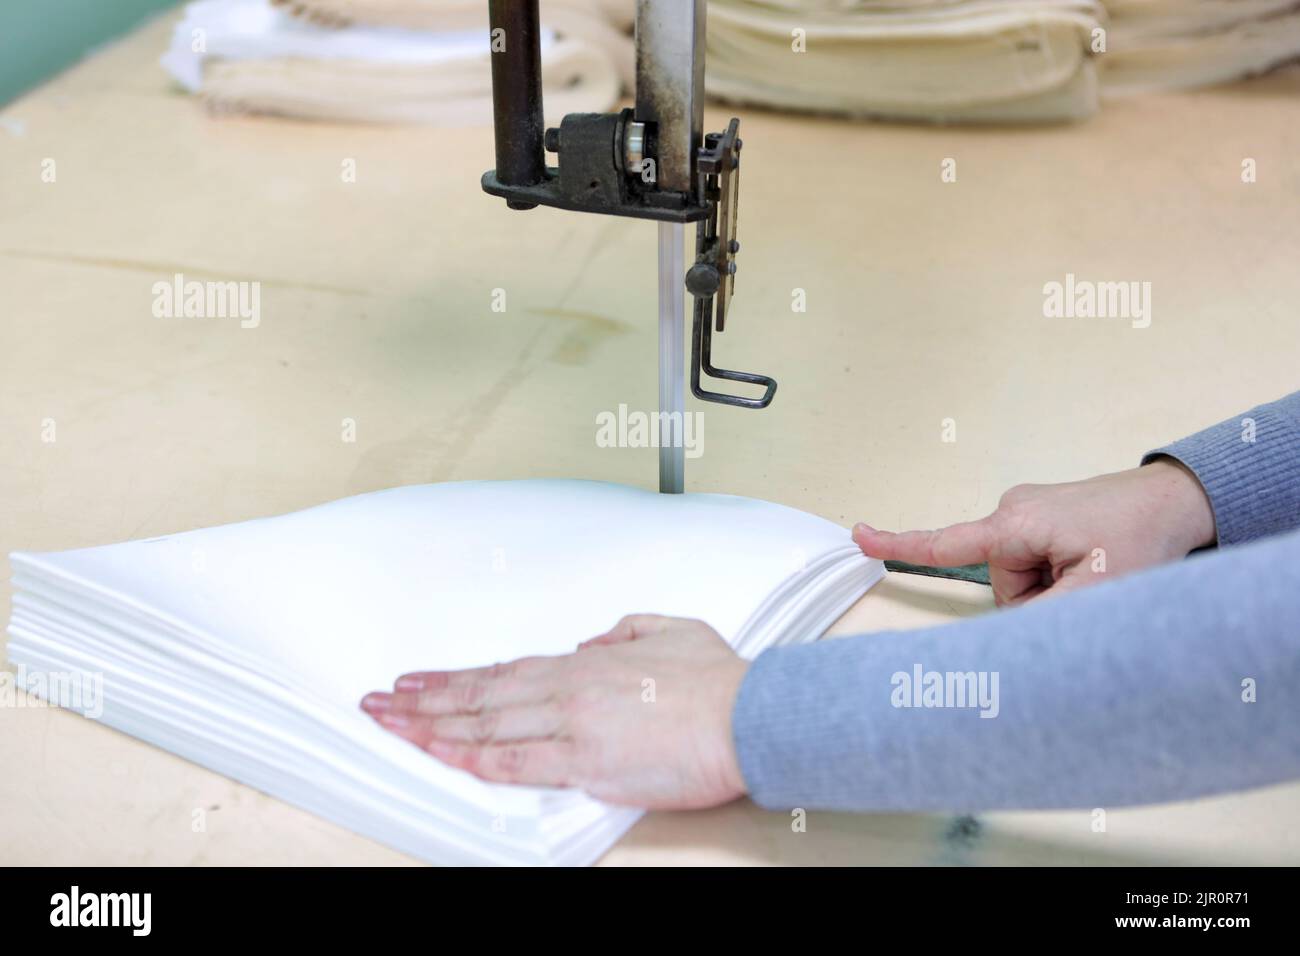 Shop for tailoring. A woman creates clothes on a sewing machine. Fashion industry for people. Stylish fashionista woman creating new cloth design coll Stock Photo